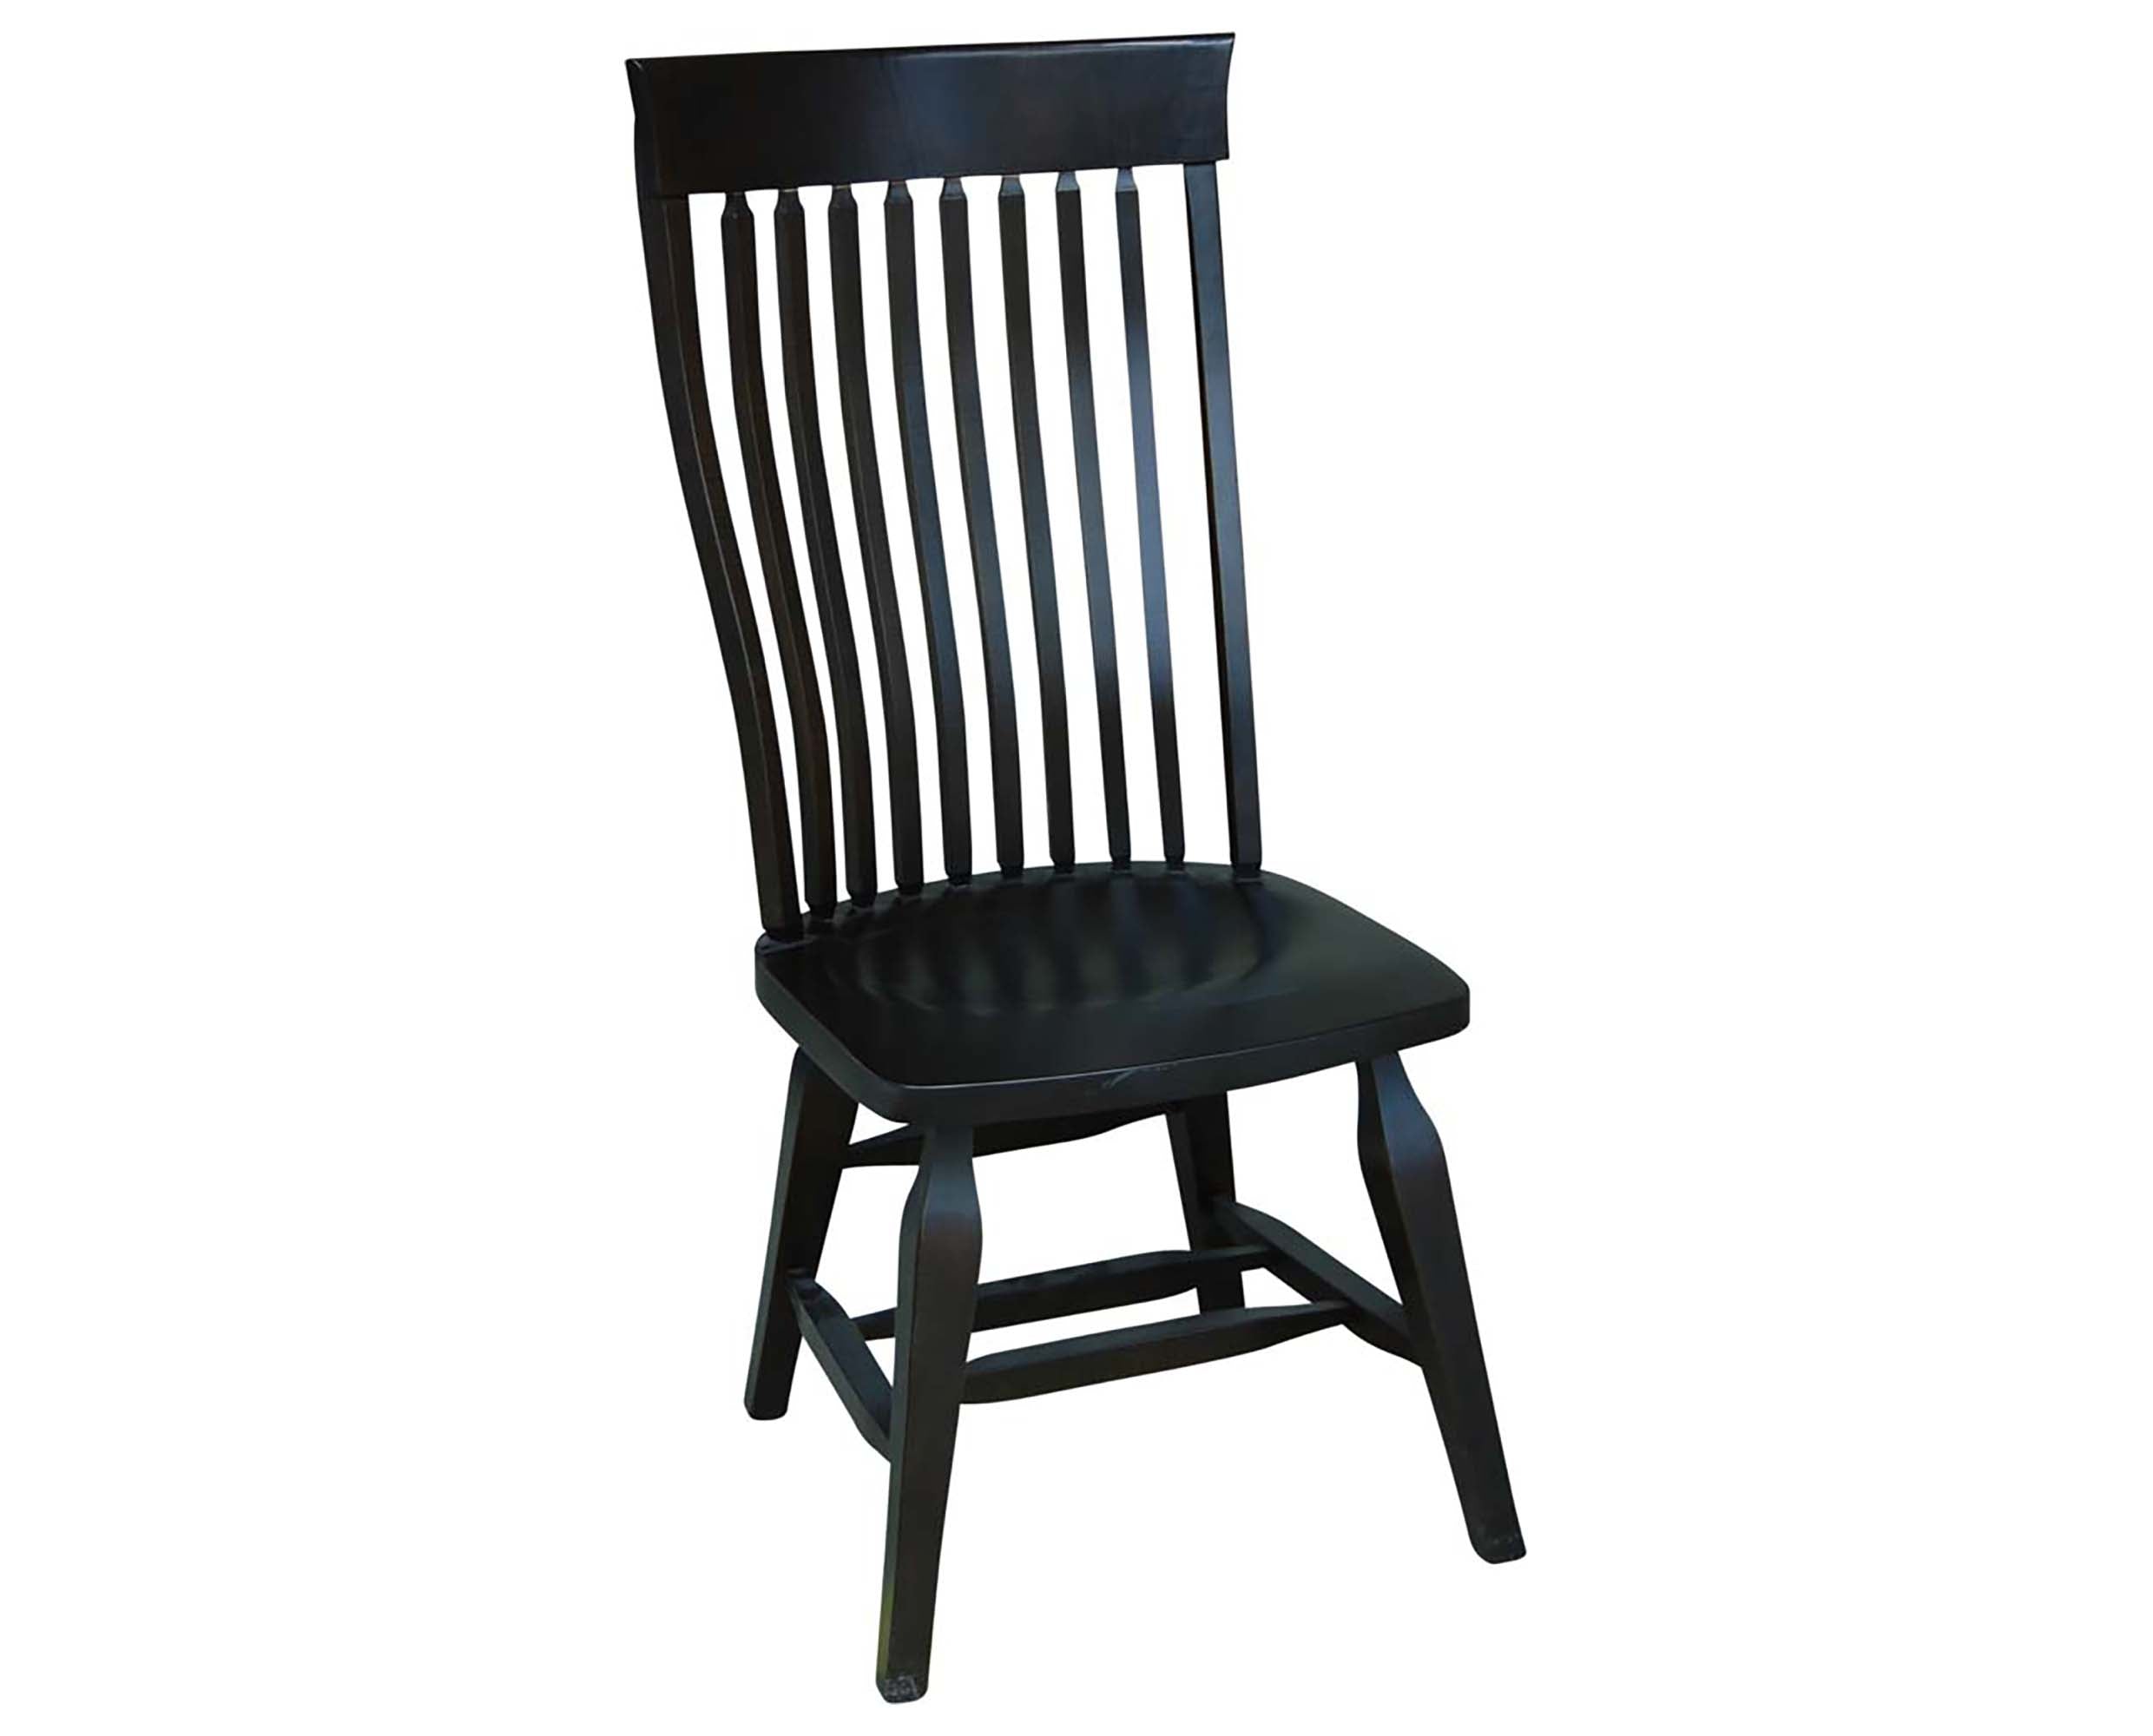 Chair as Shown | Cardinal Woodcraft Oxford Dining Chair | Valley Ridge Furniture